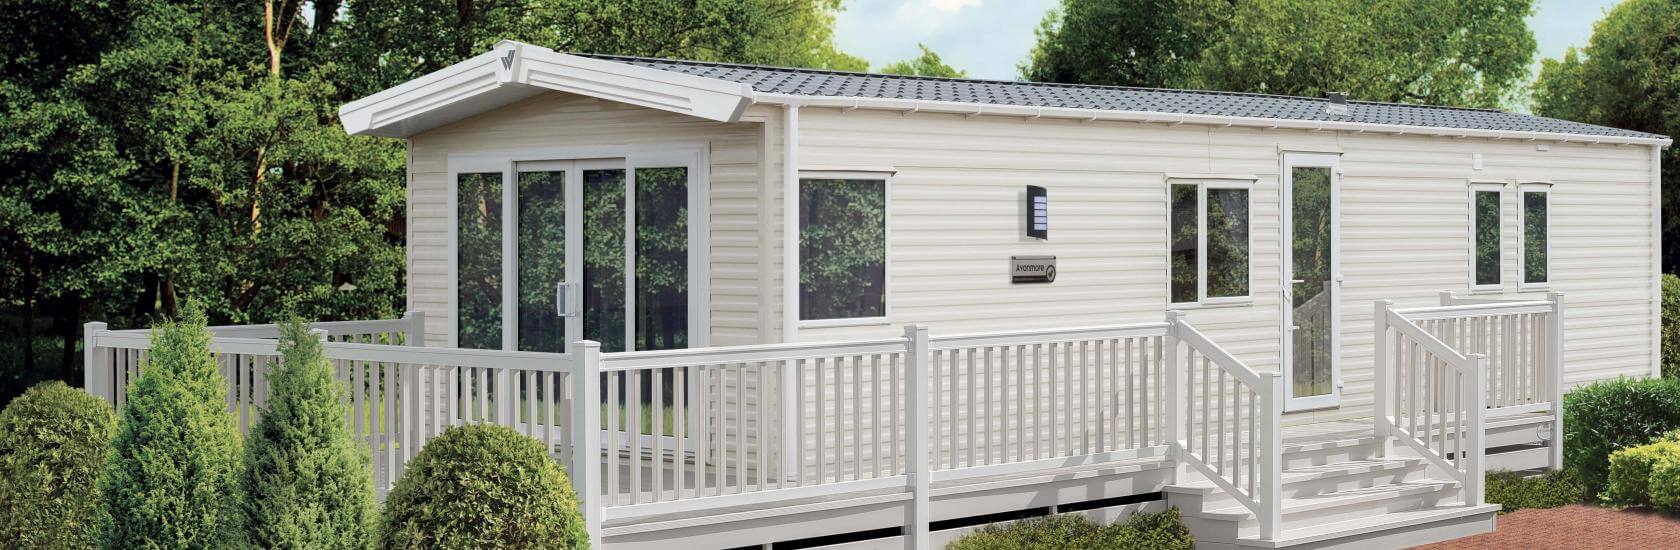 How to move a Static Caravan?  | Willerby